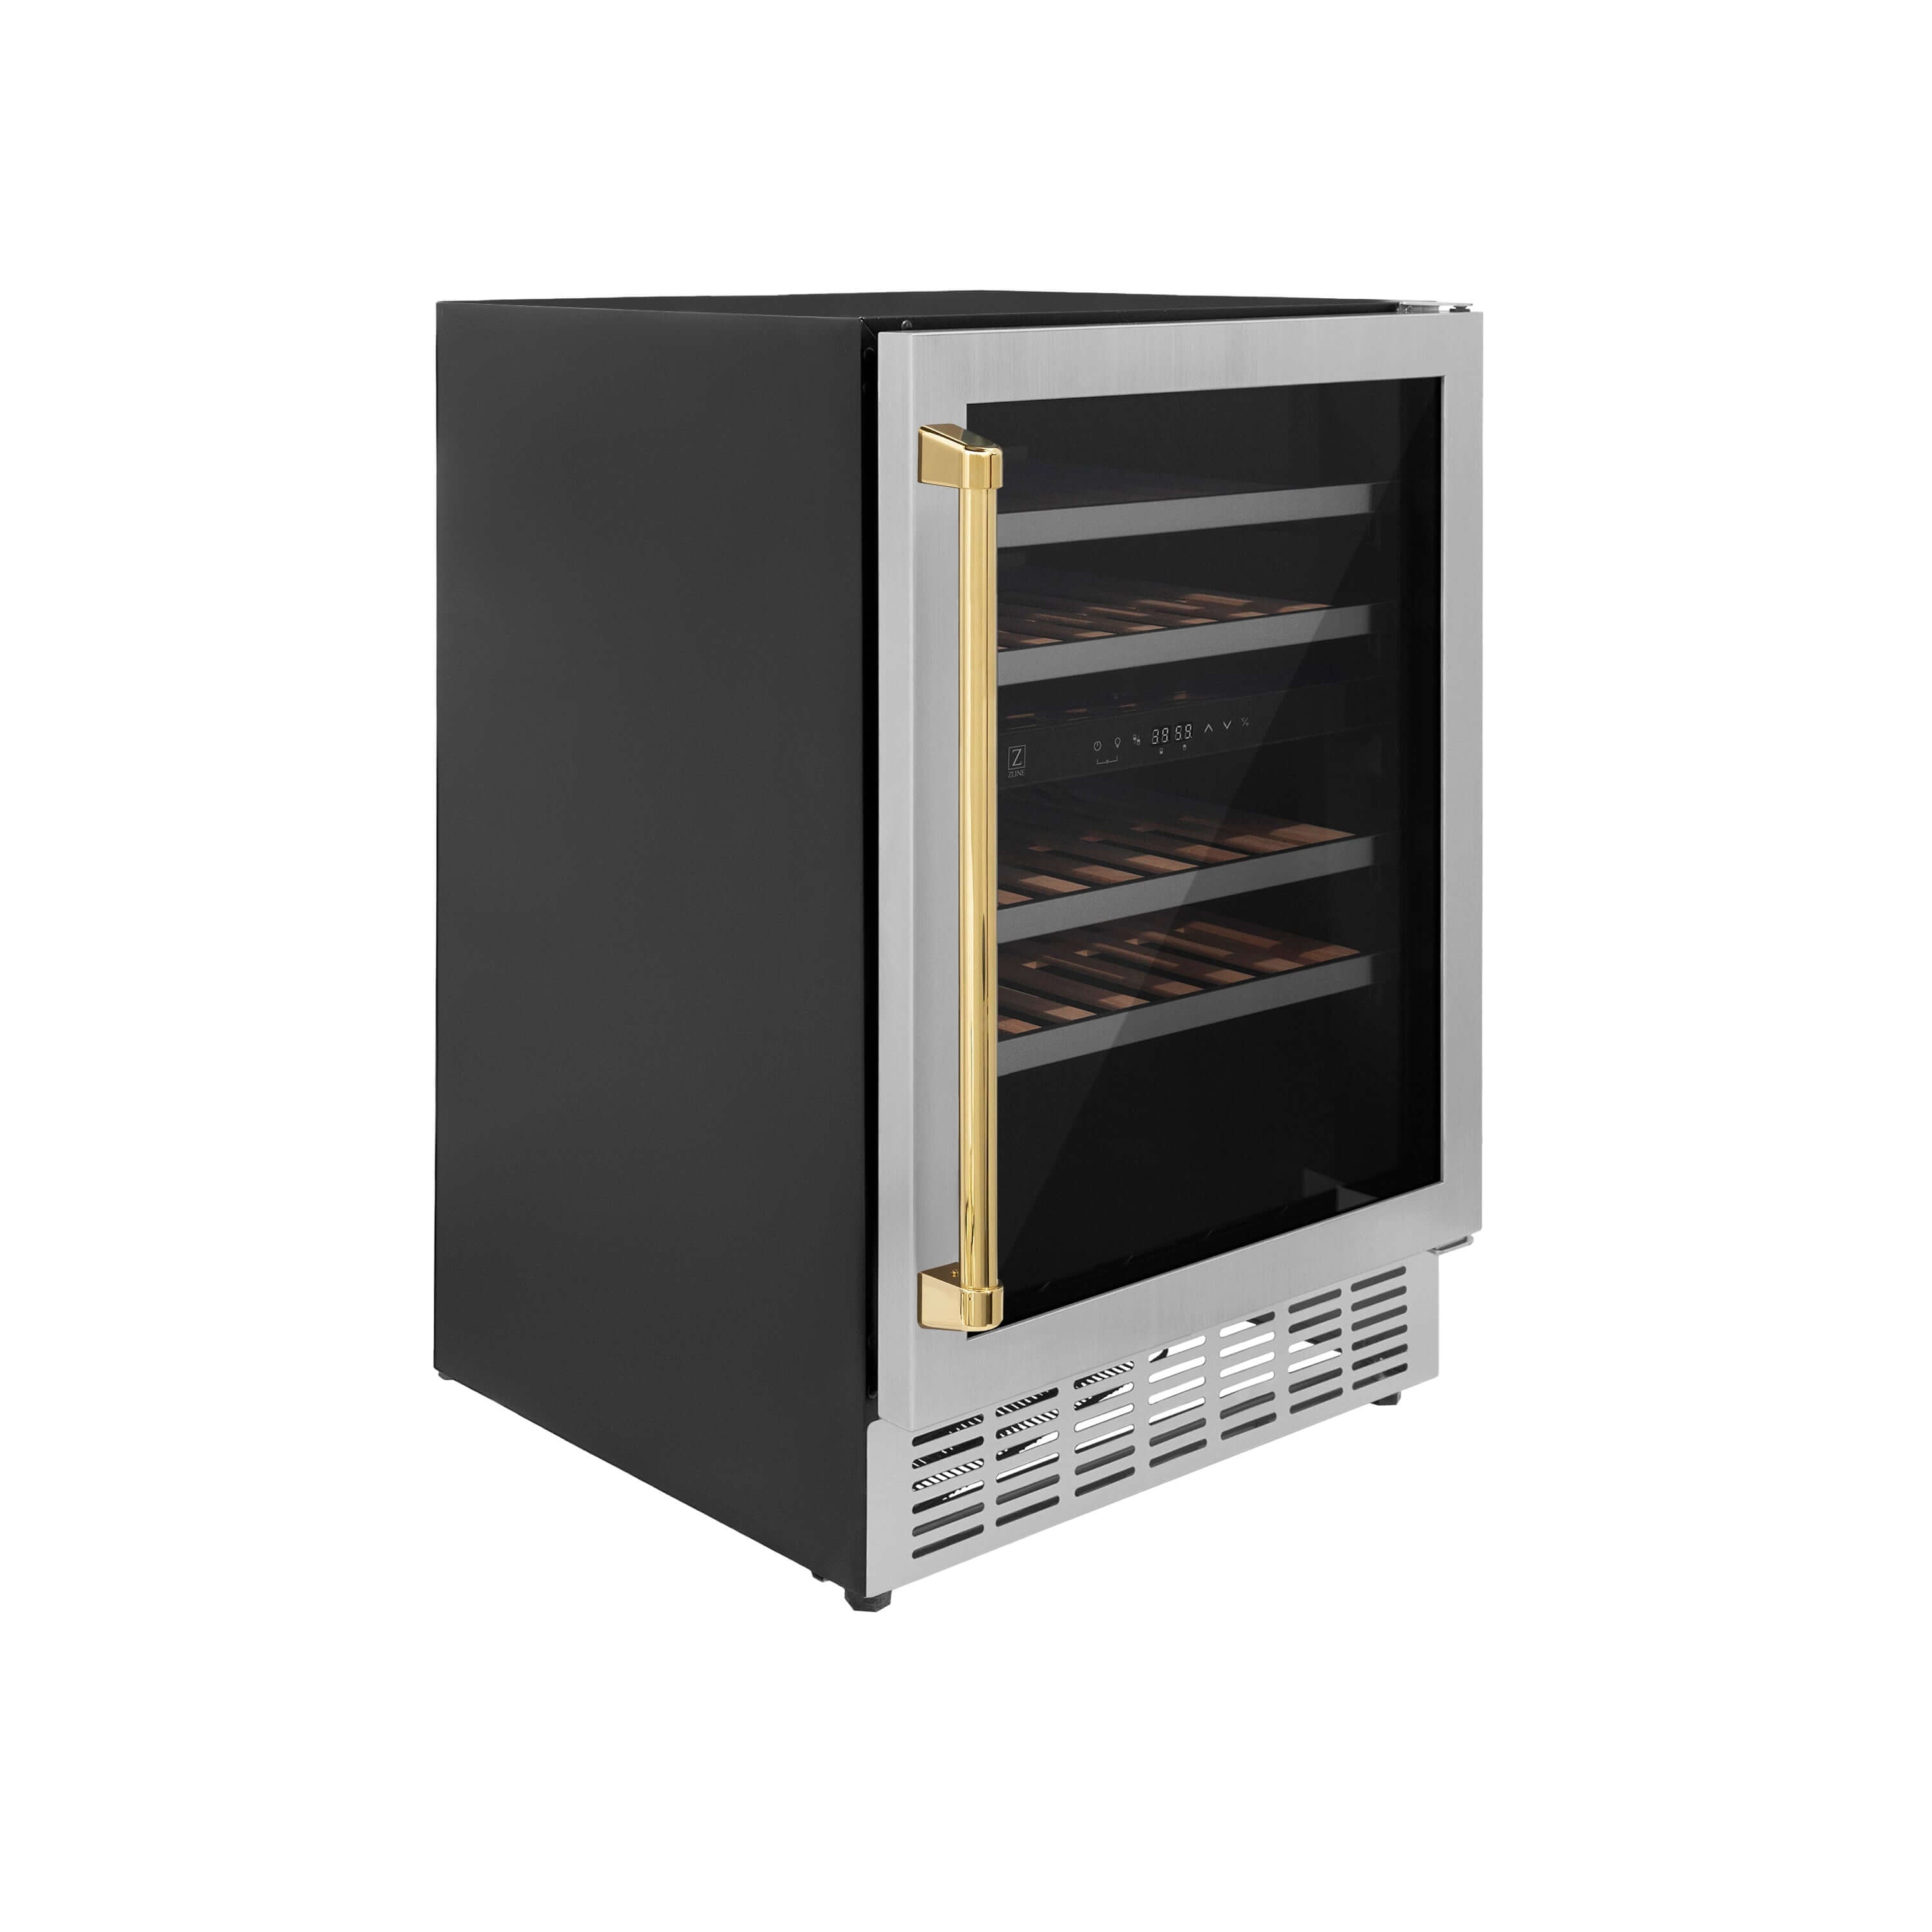 ZLINE Autograph Edition 24 in. Monument Dual Zone 44-Bottle Wine Cooler in Stainless Steel with Polished Gold Accents (RWVZ-UD-24-G) side, closed.